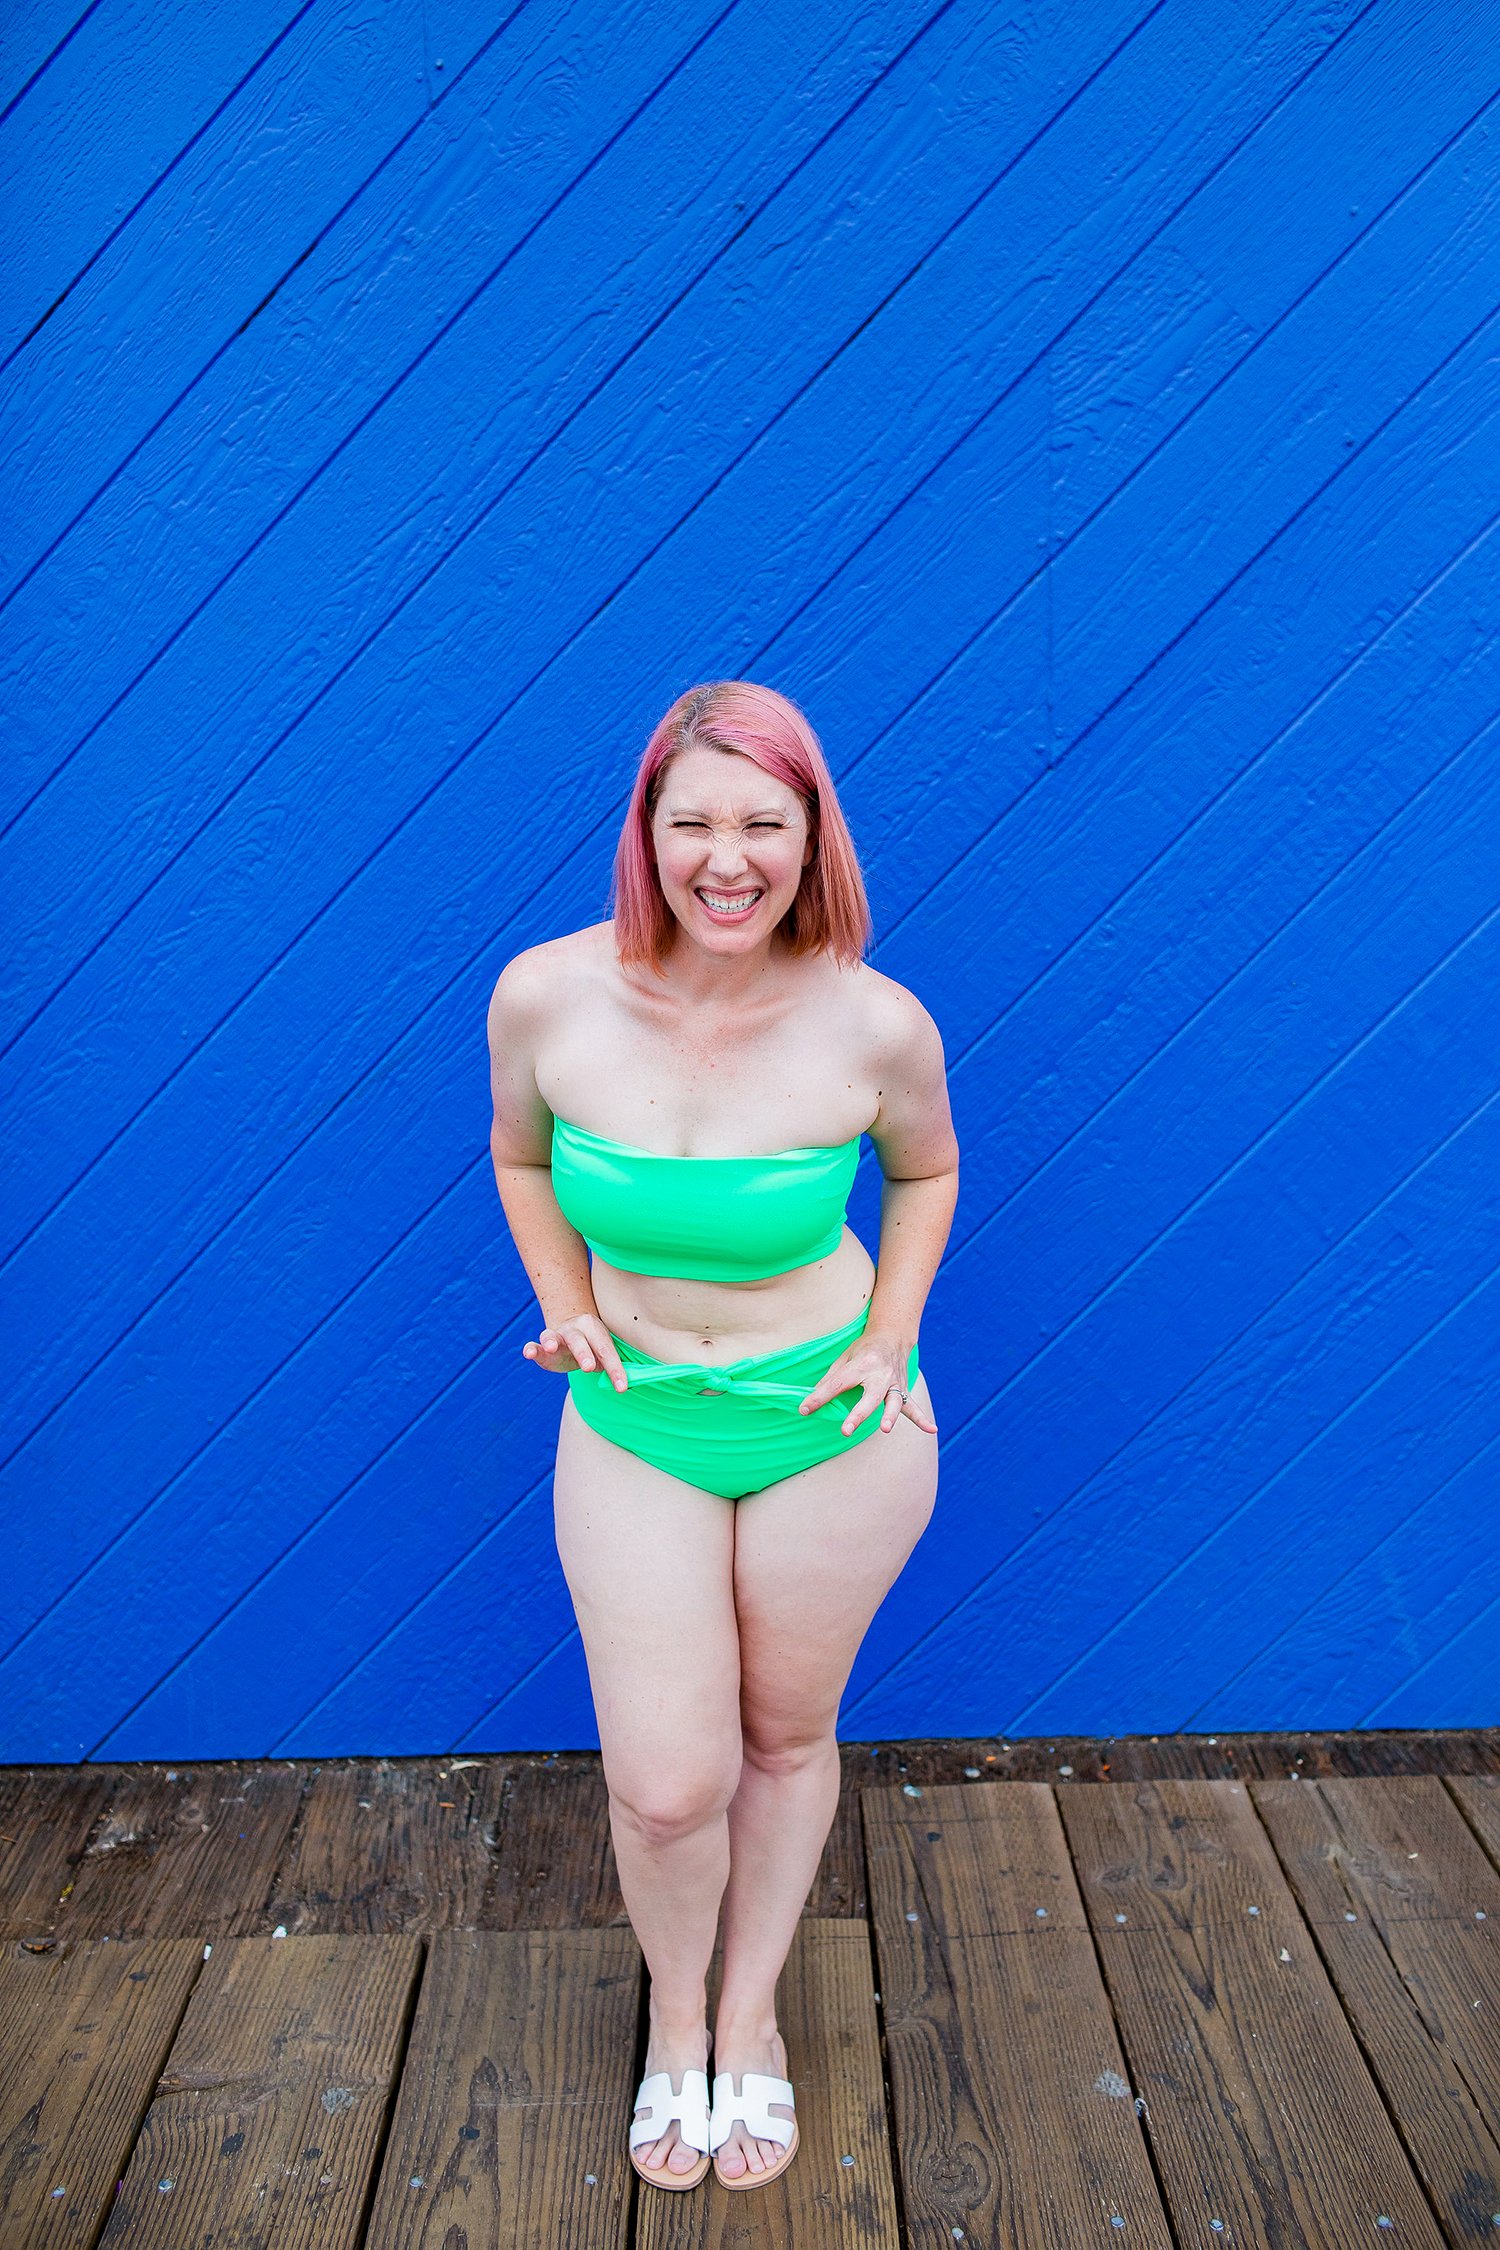 On the hunt for the best bikinis for pear shaped bodies? This green bandeau bikini is PERFECT for summer!